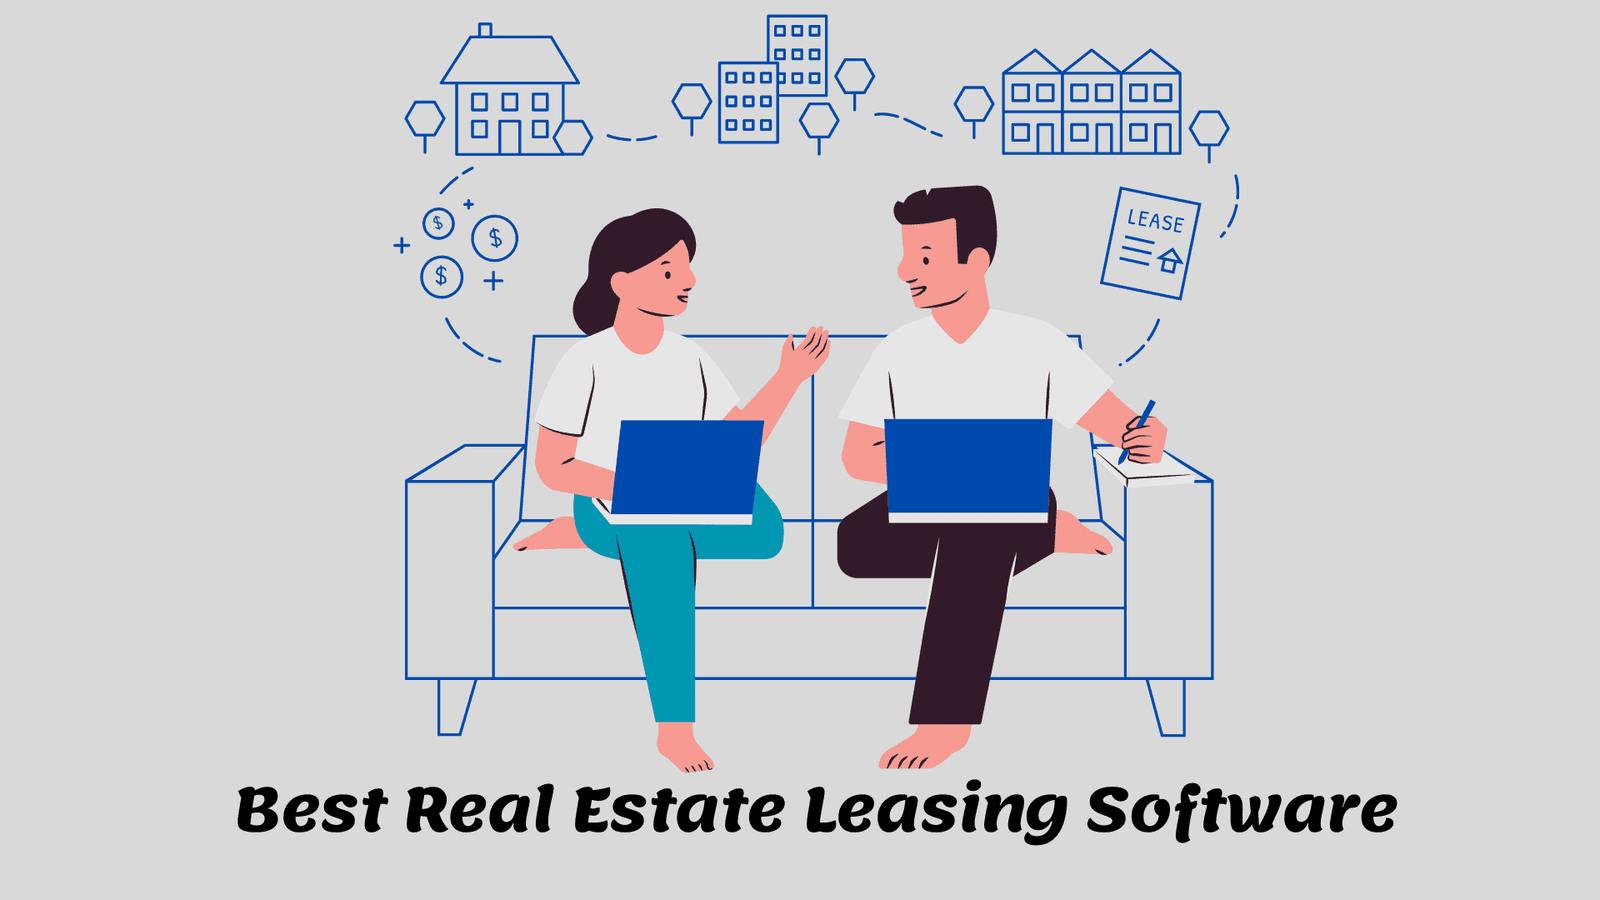 The Ultimate Guide to Finding the Best Real Estate Leasing Software Image